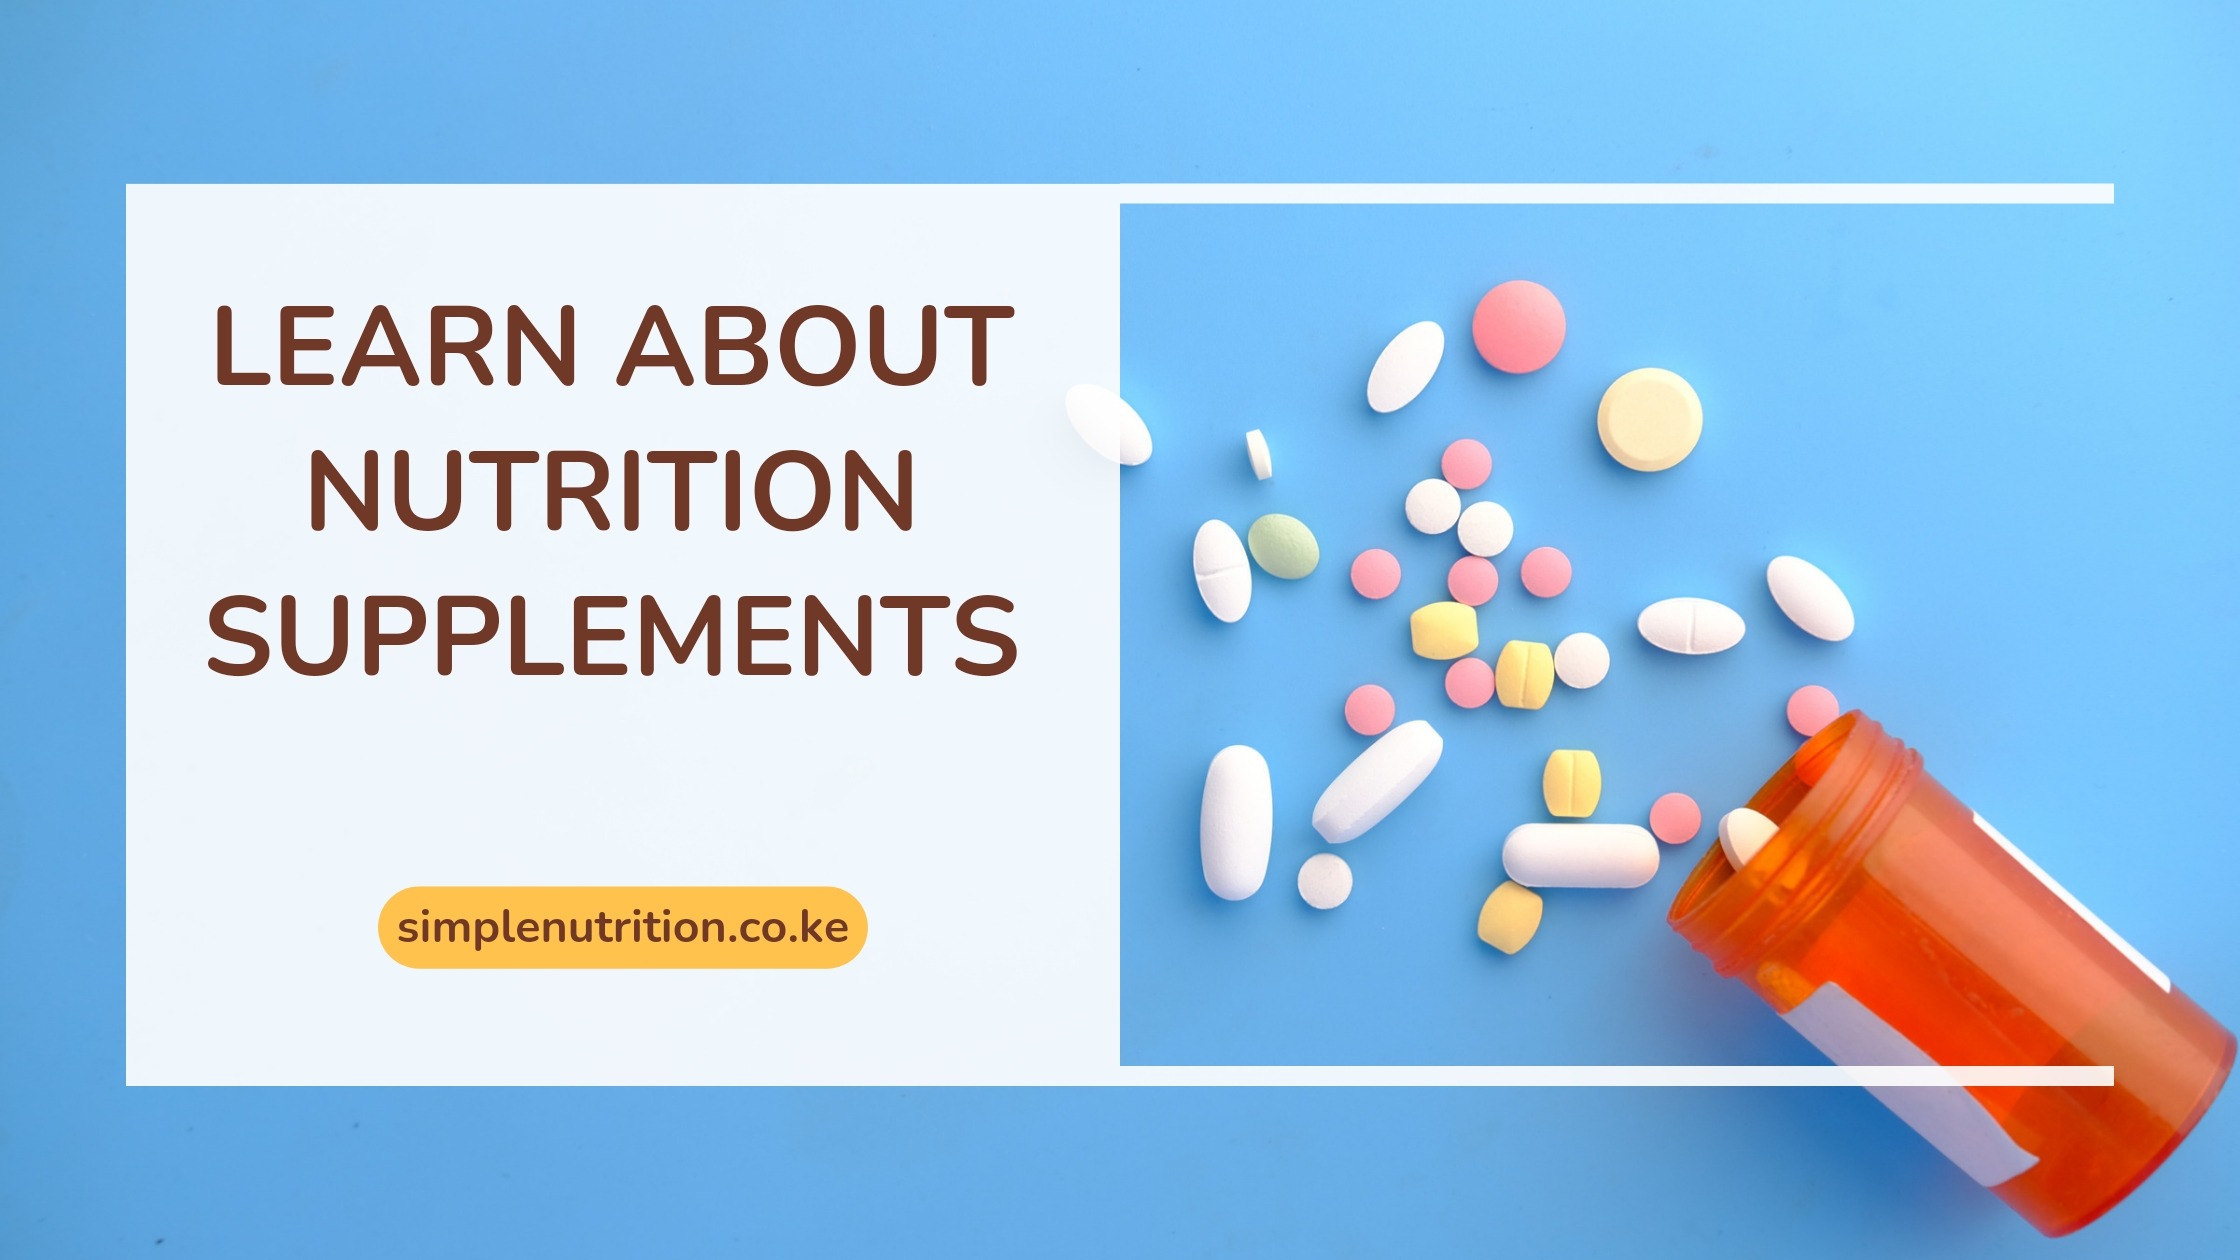 What you need to know about Nutrition supplements.